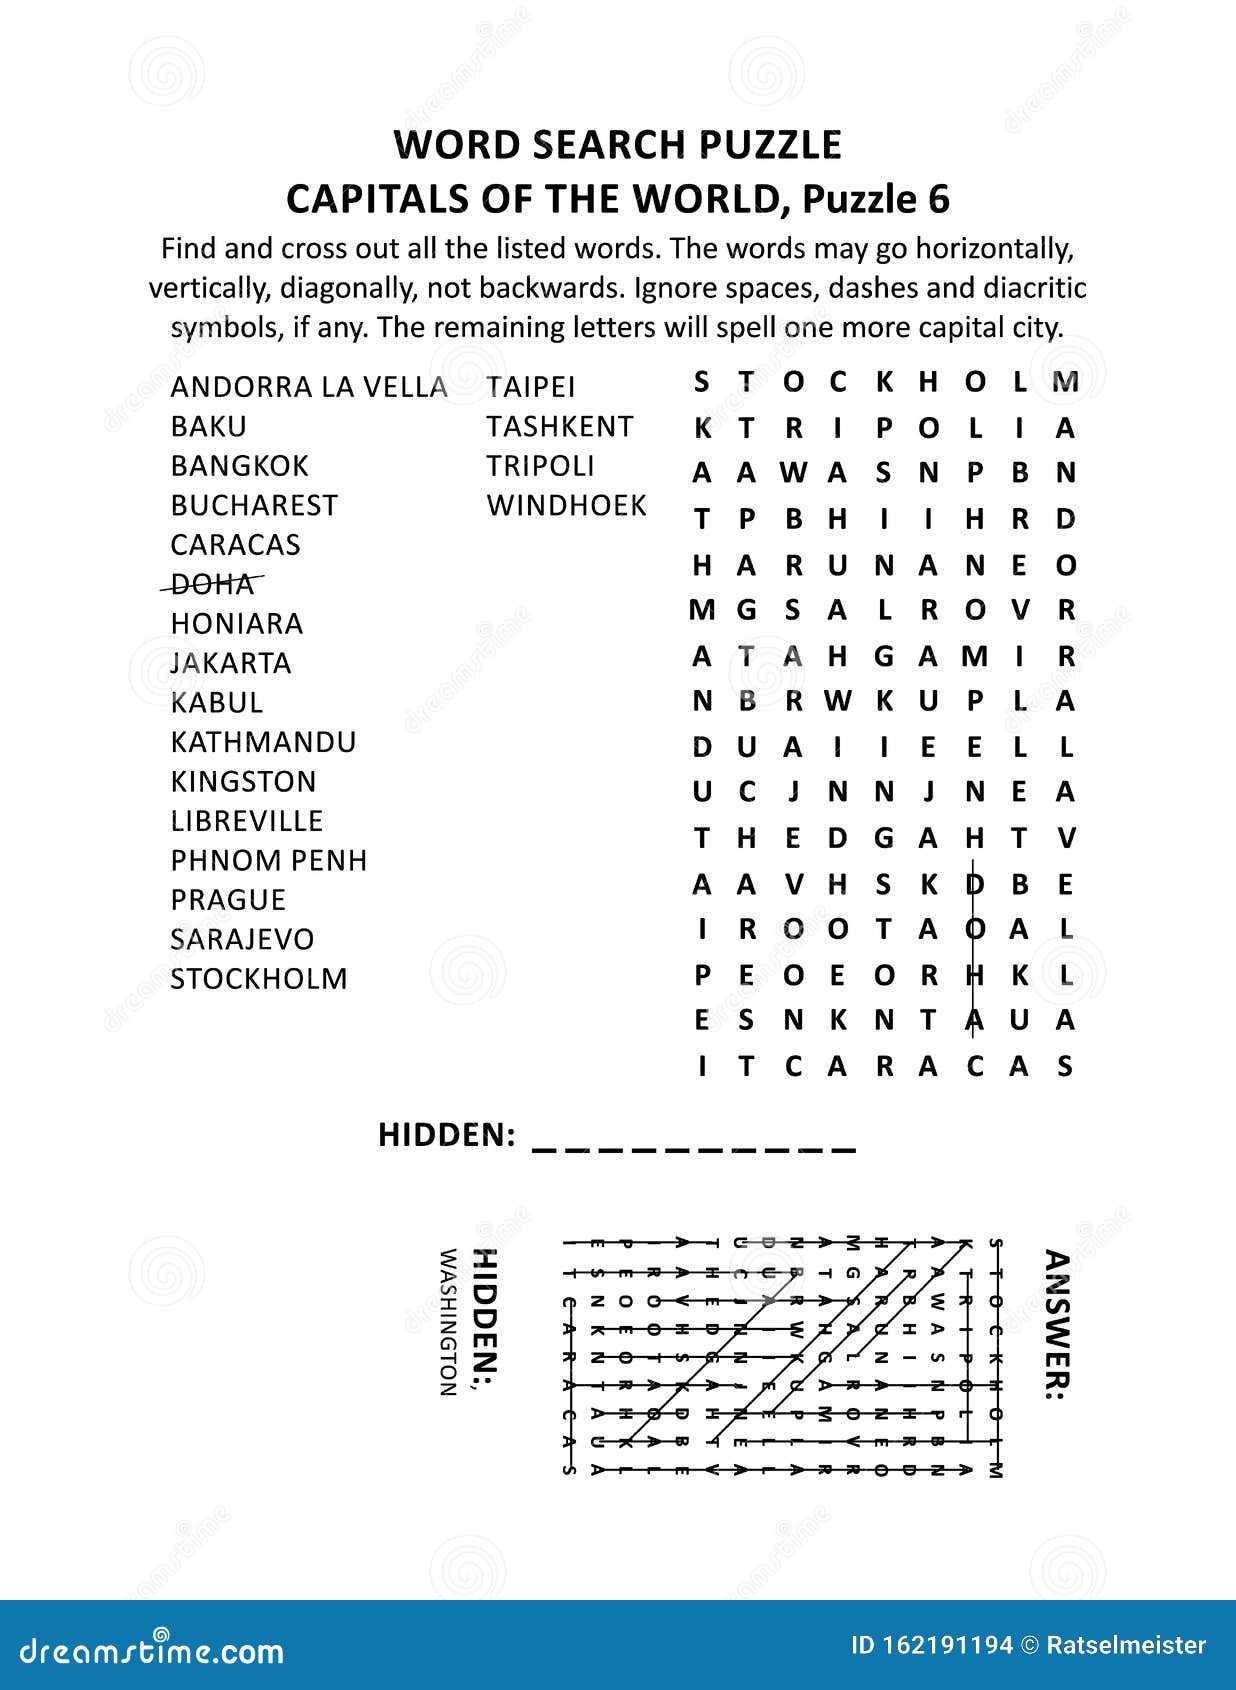 capitals of the world word search puzzle, puzzle 6 of 10